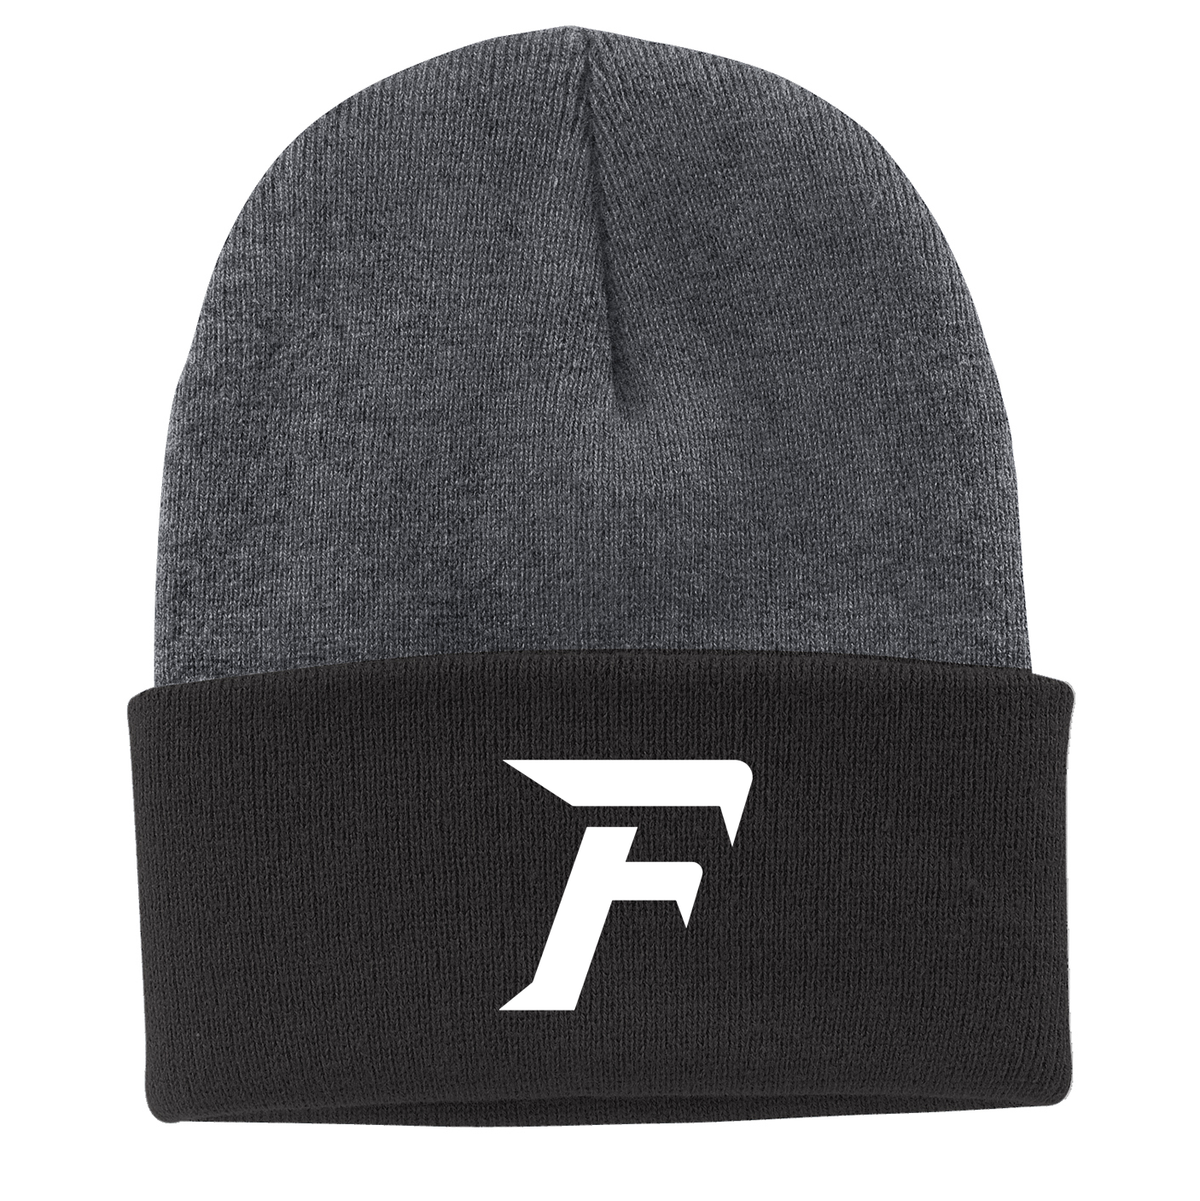 Foothill Falcons Knit Beanie